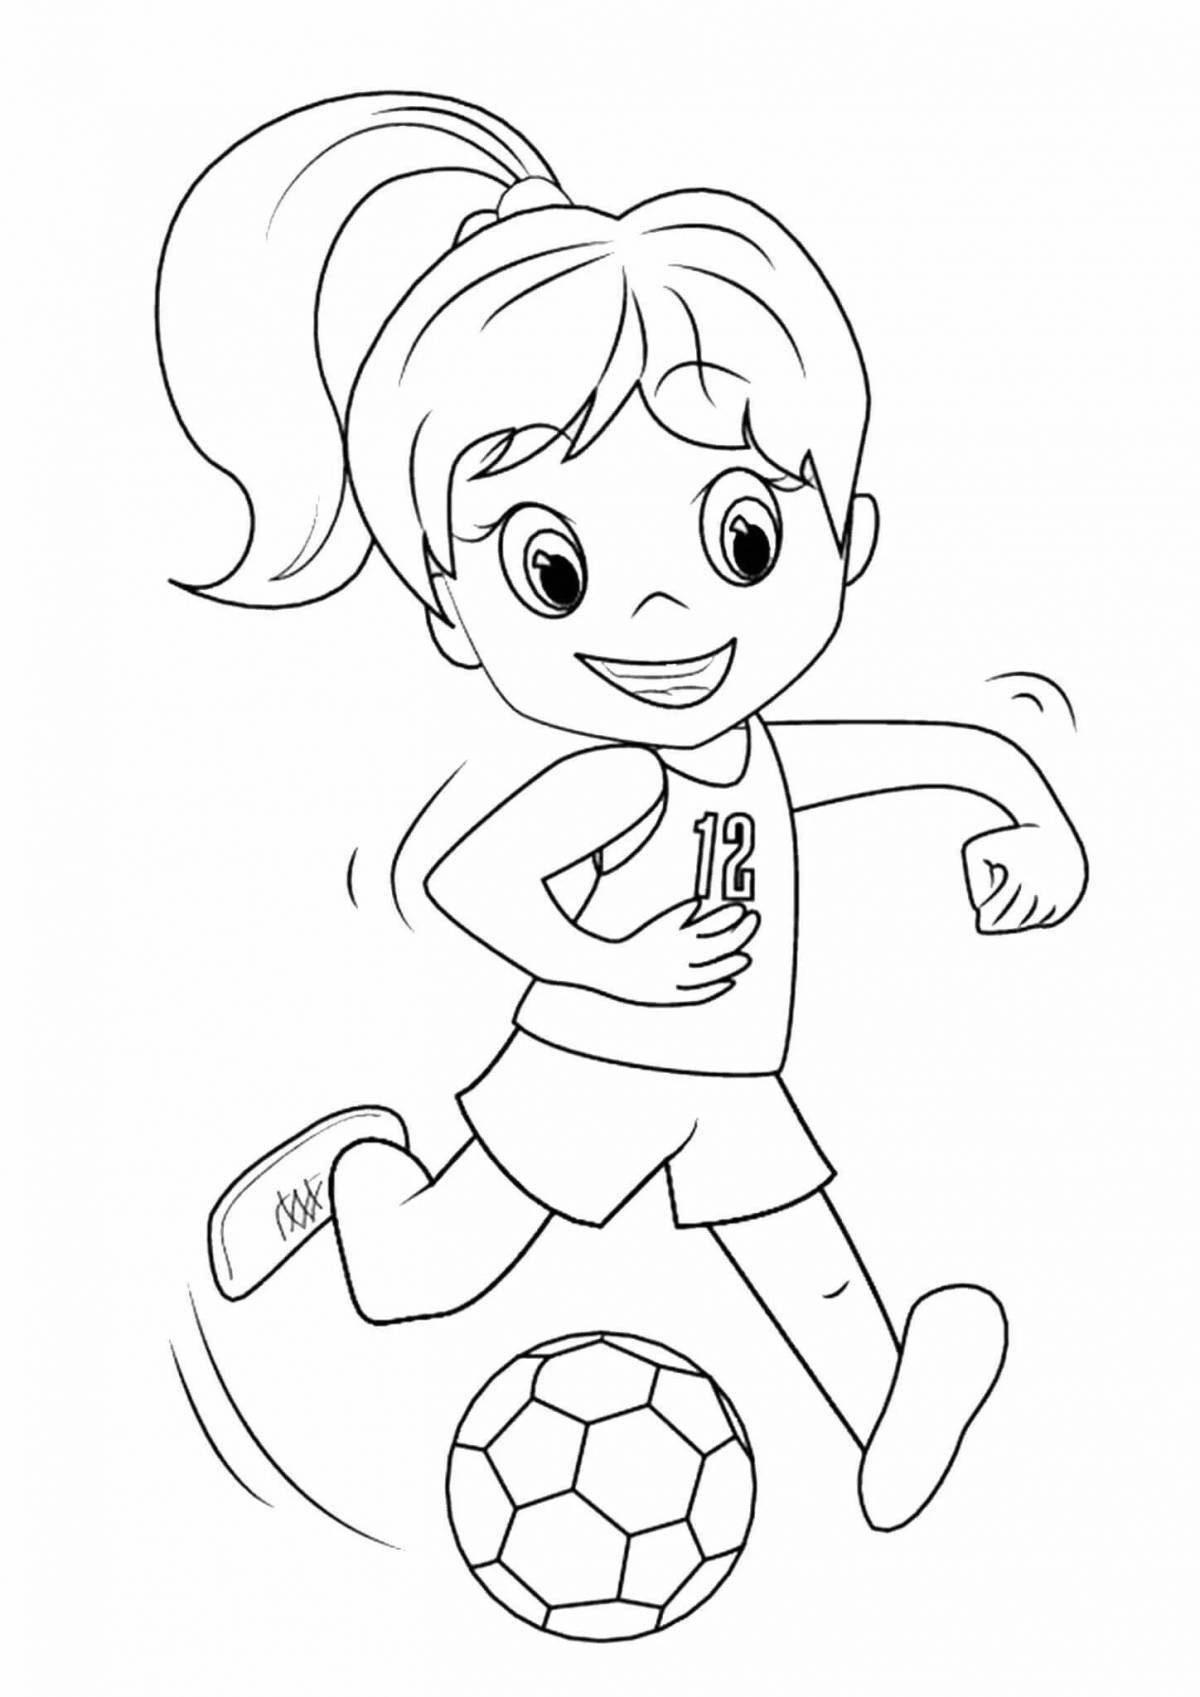 Bright sports coloring